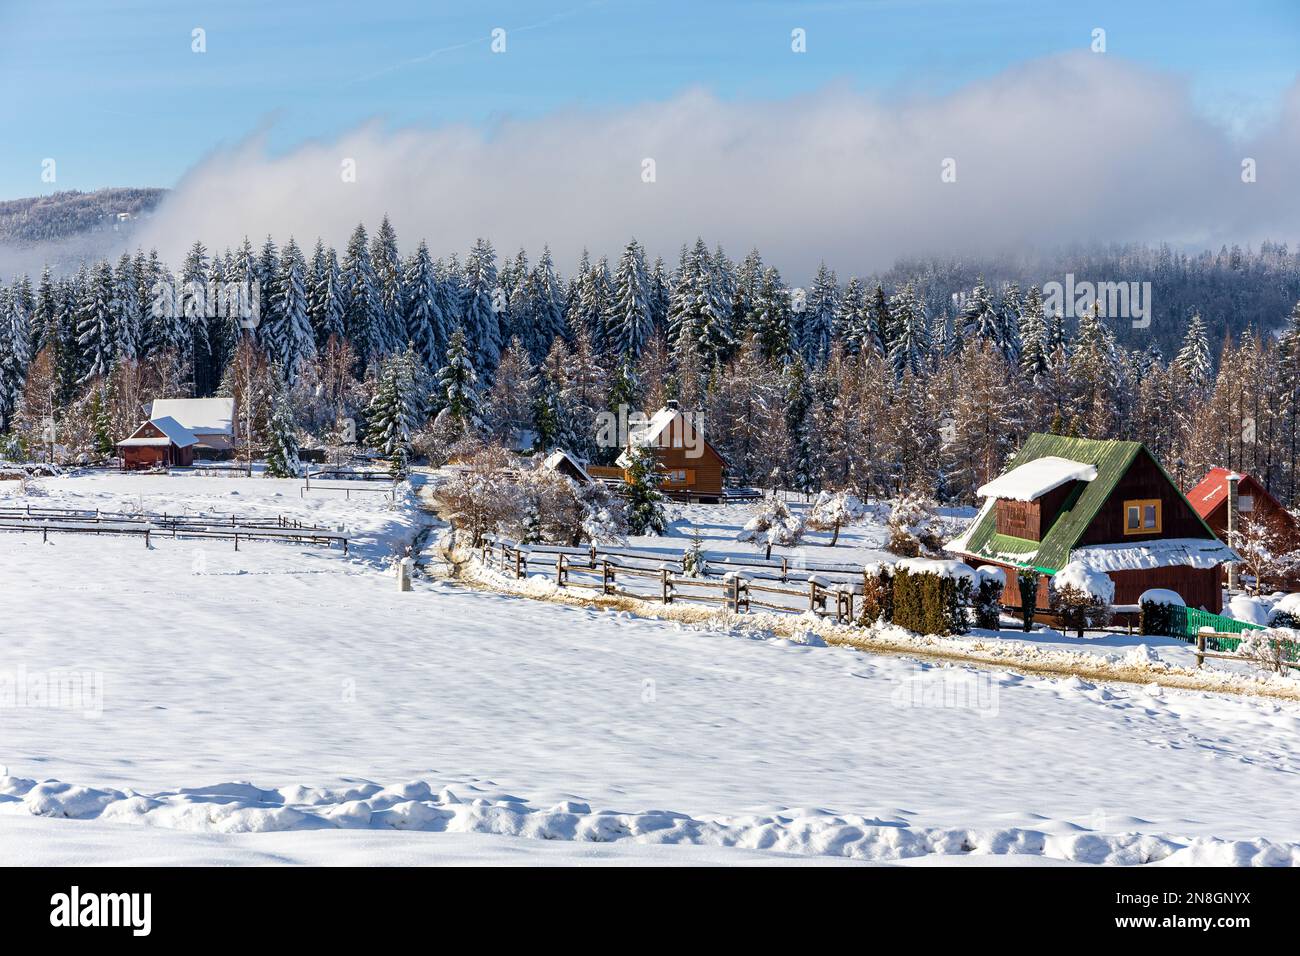 Plone farm village in Zabnica, Wegierska Gorka, Poland, traditional wooden mountain style cottages covered with snow with snowy Beskid Mountains and m Stock Photo